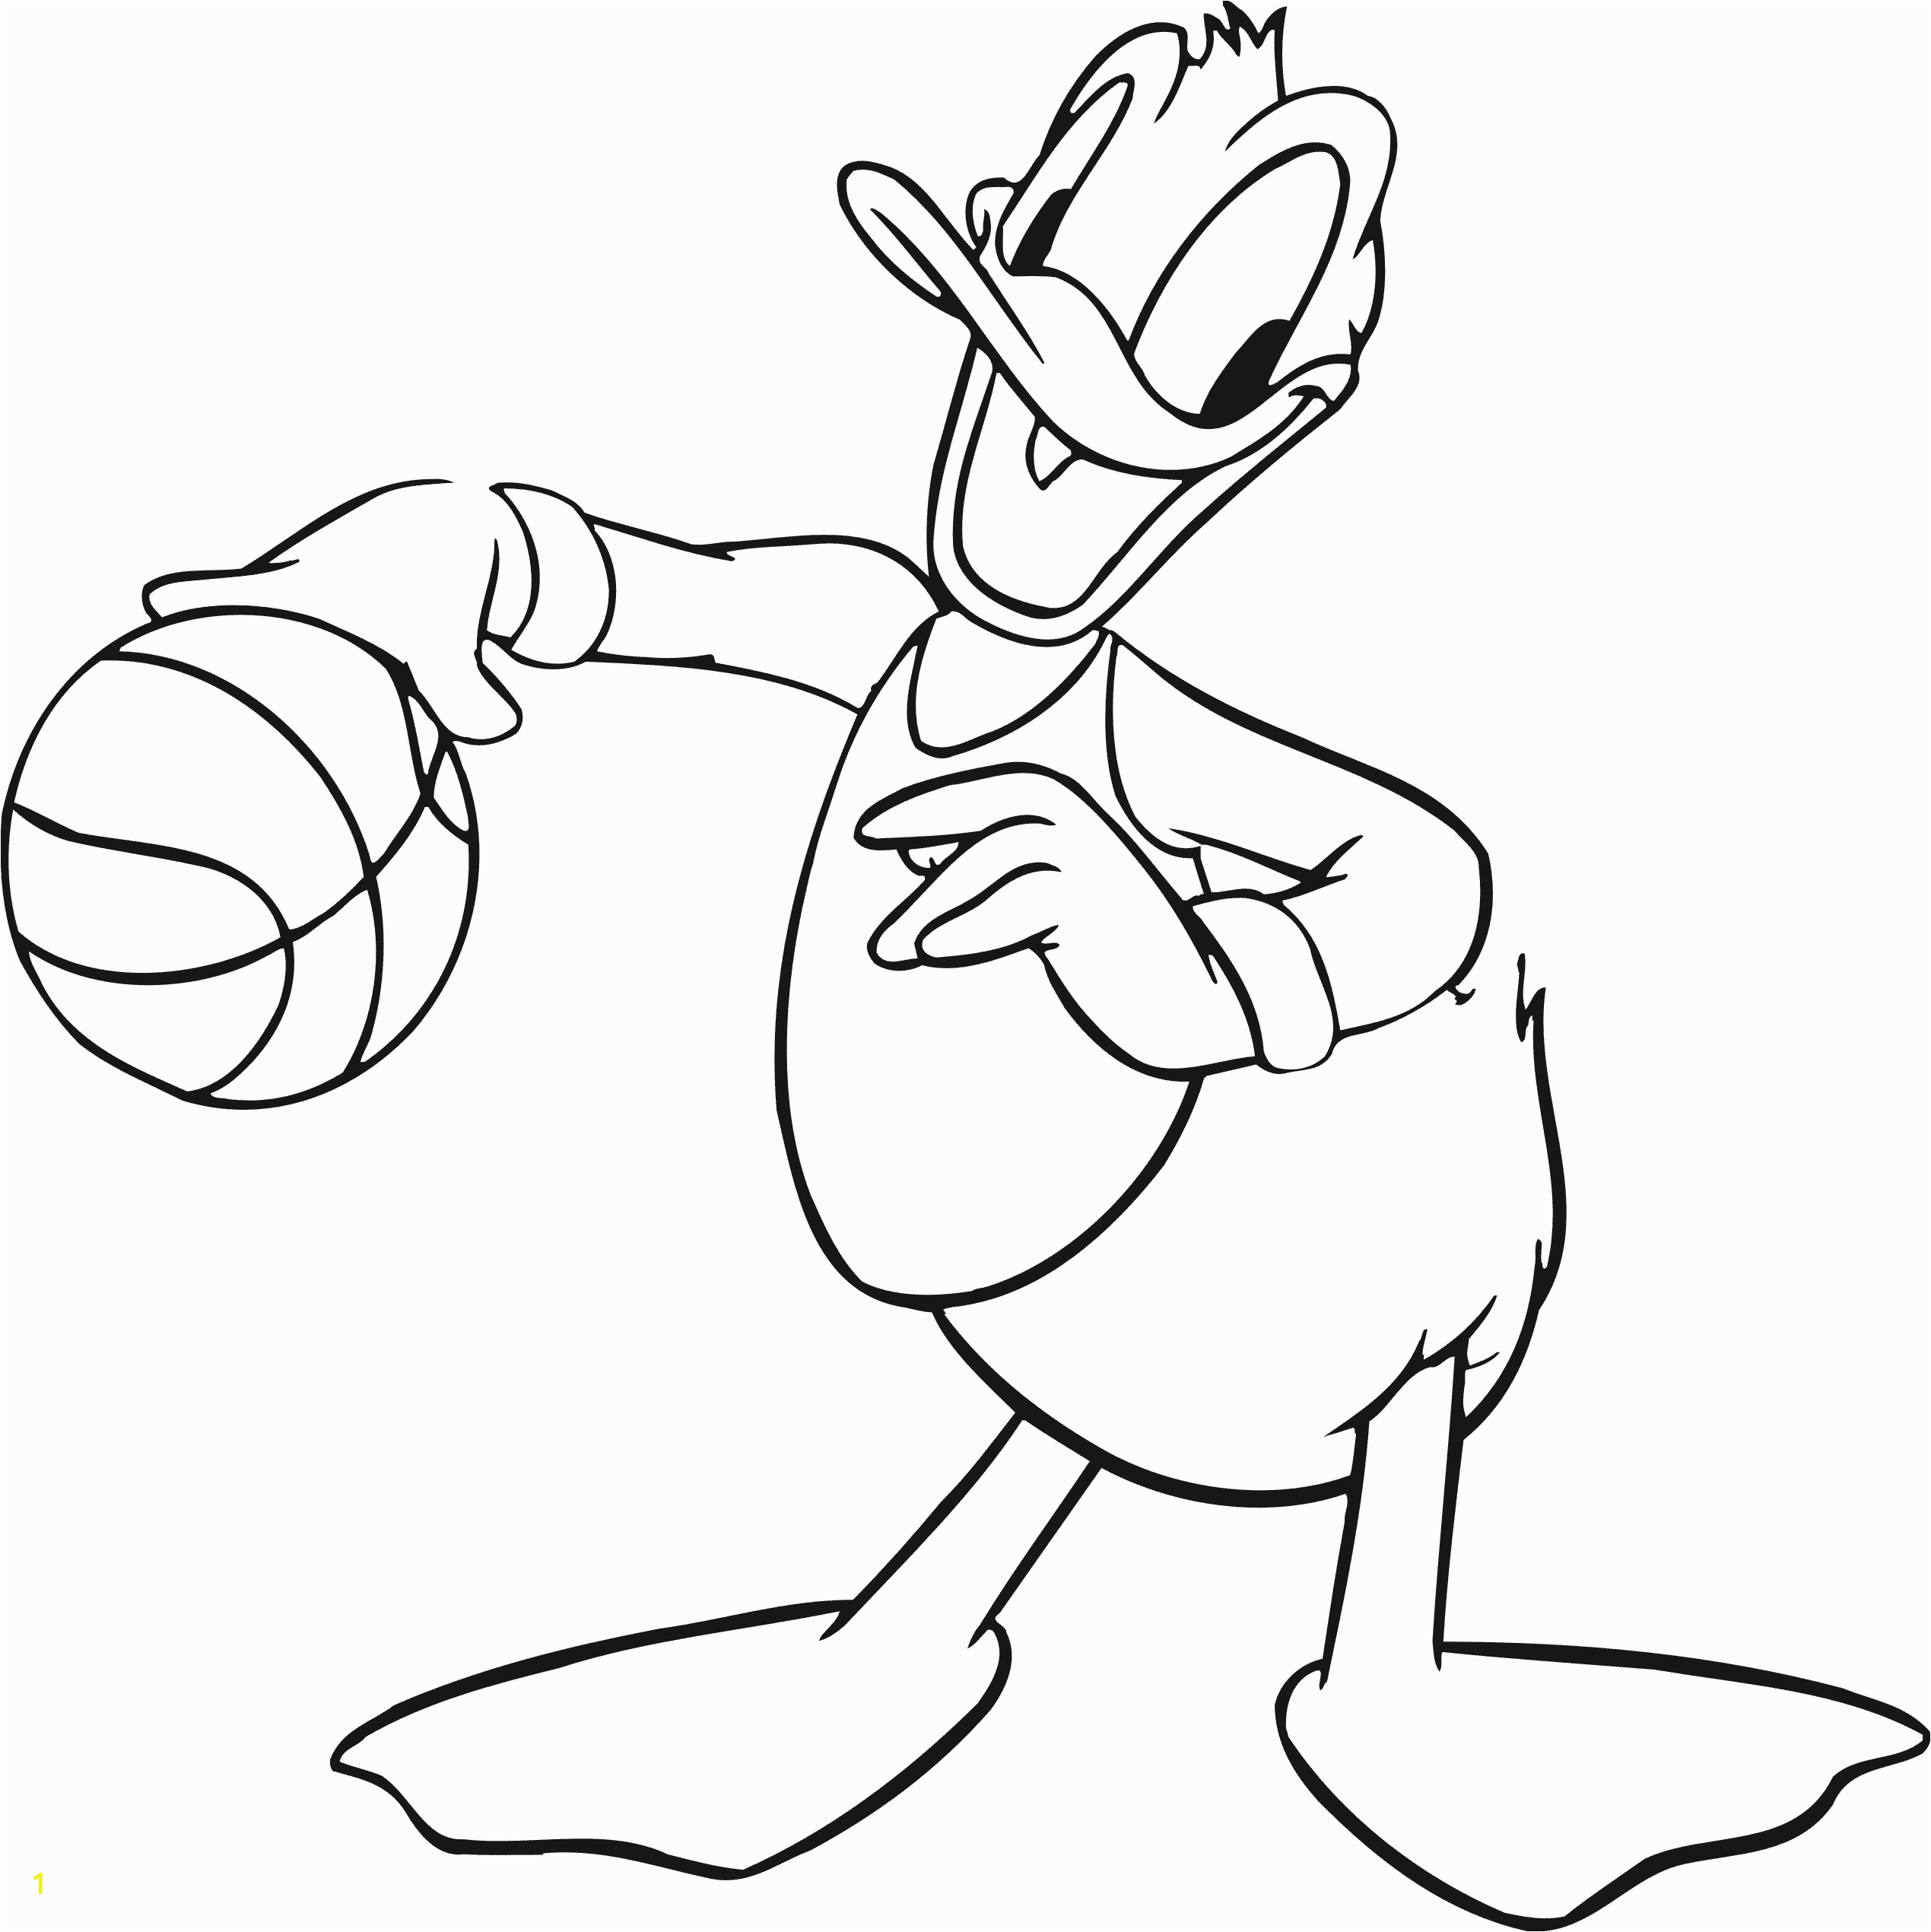 Donald Duck Coloring Pages to Print for Free Donald Duck Coloring Pages to and Print for Free